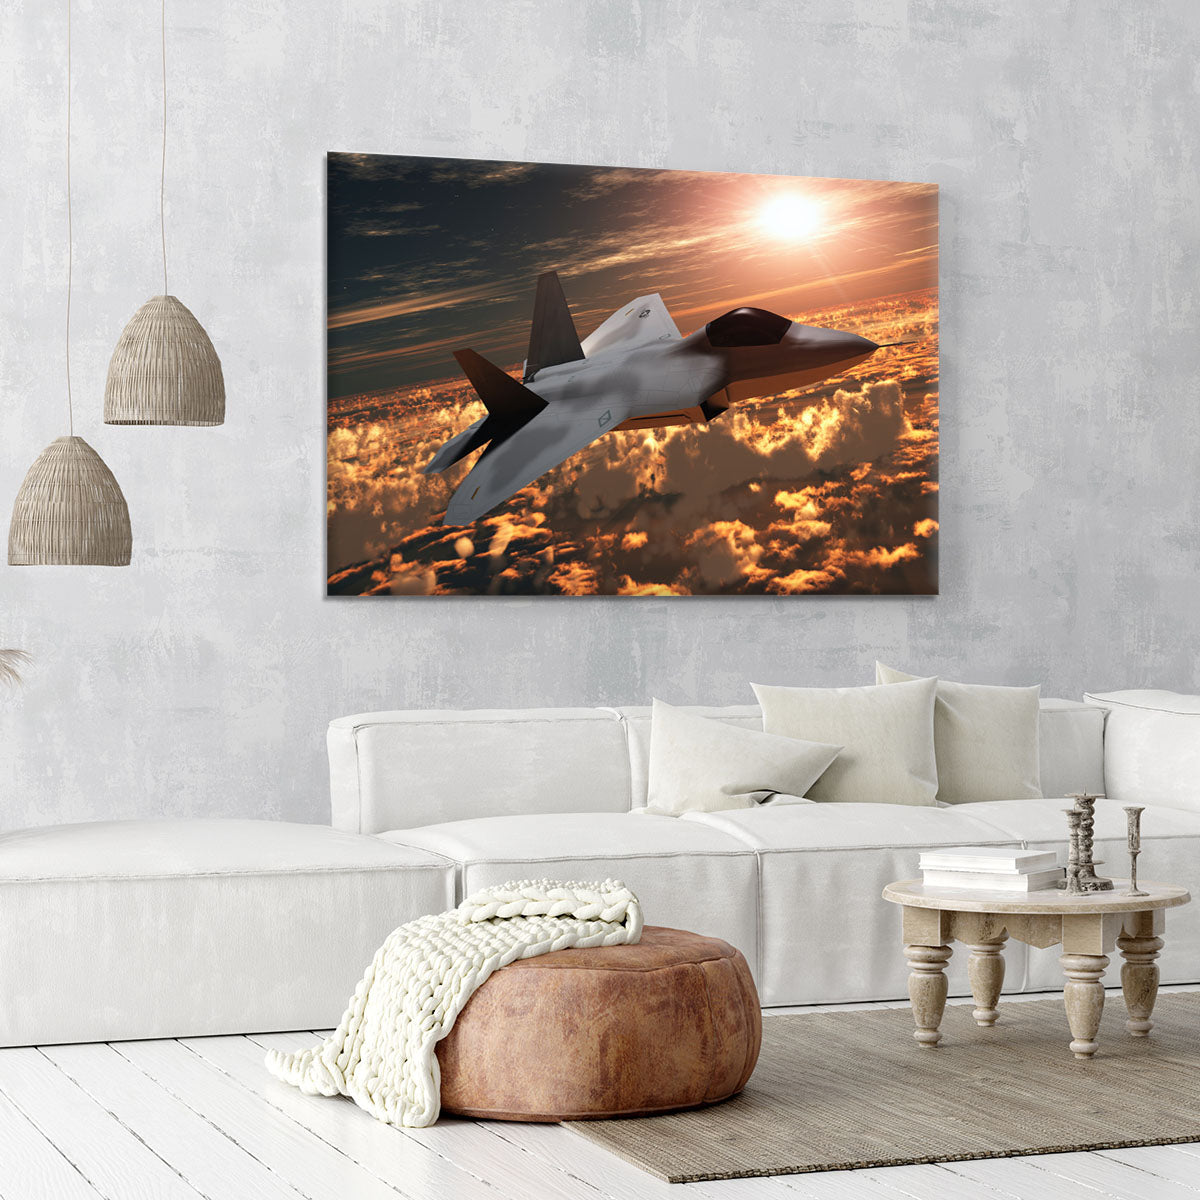 F22 Fighter Jet at Sunset Canvas Print or Poster - Canvas Art Rocks - 6